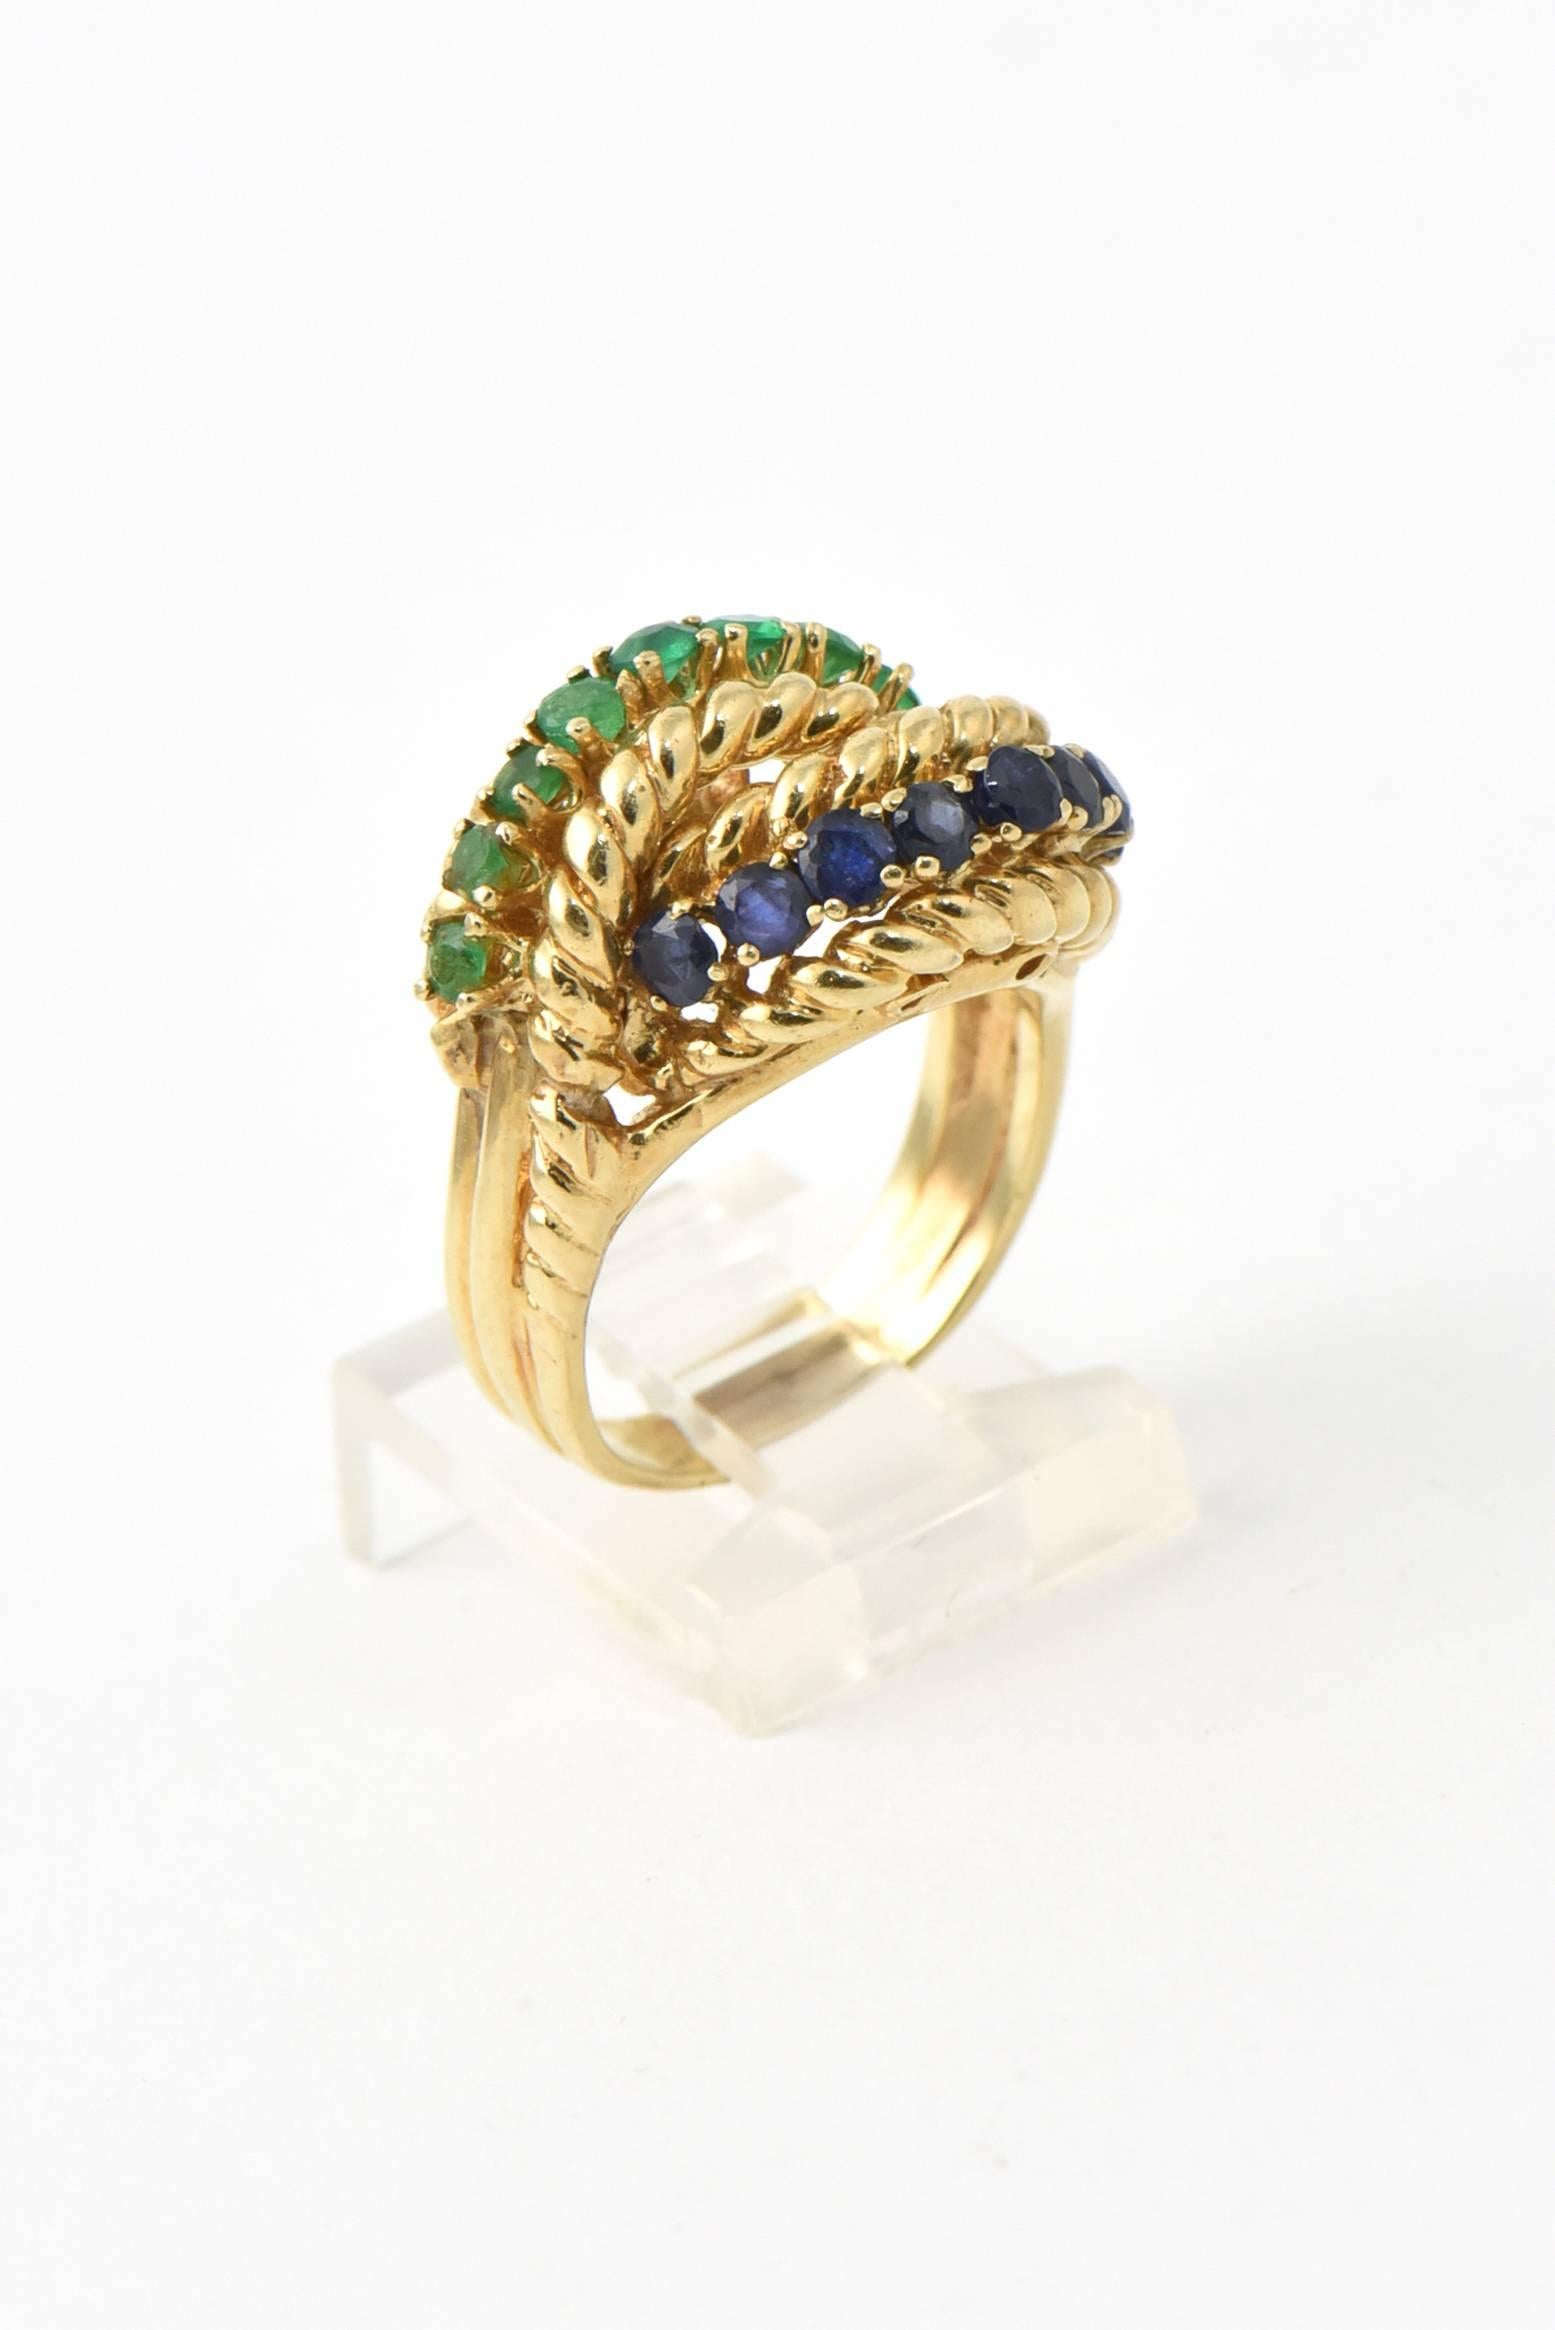 1960s Twisted interlinked 14k yellow gold rope ring accented by a section of prong set emeralds and sapphires.

US size 7.25 - it can be sized